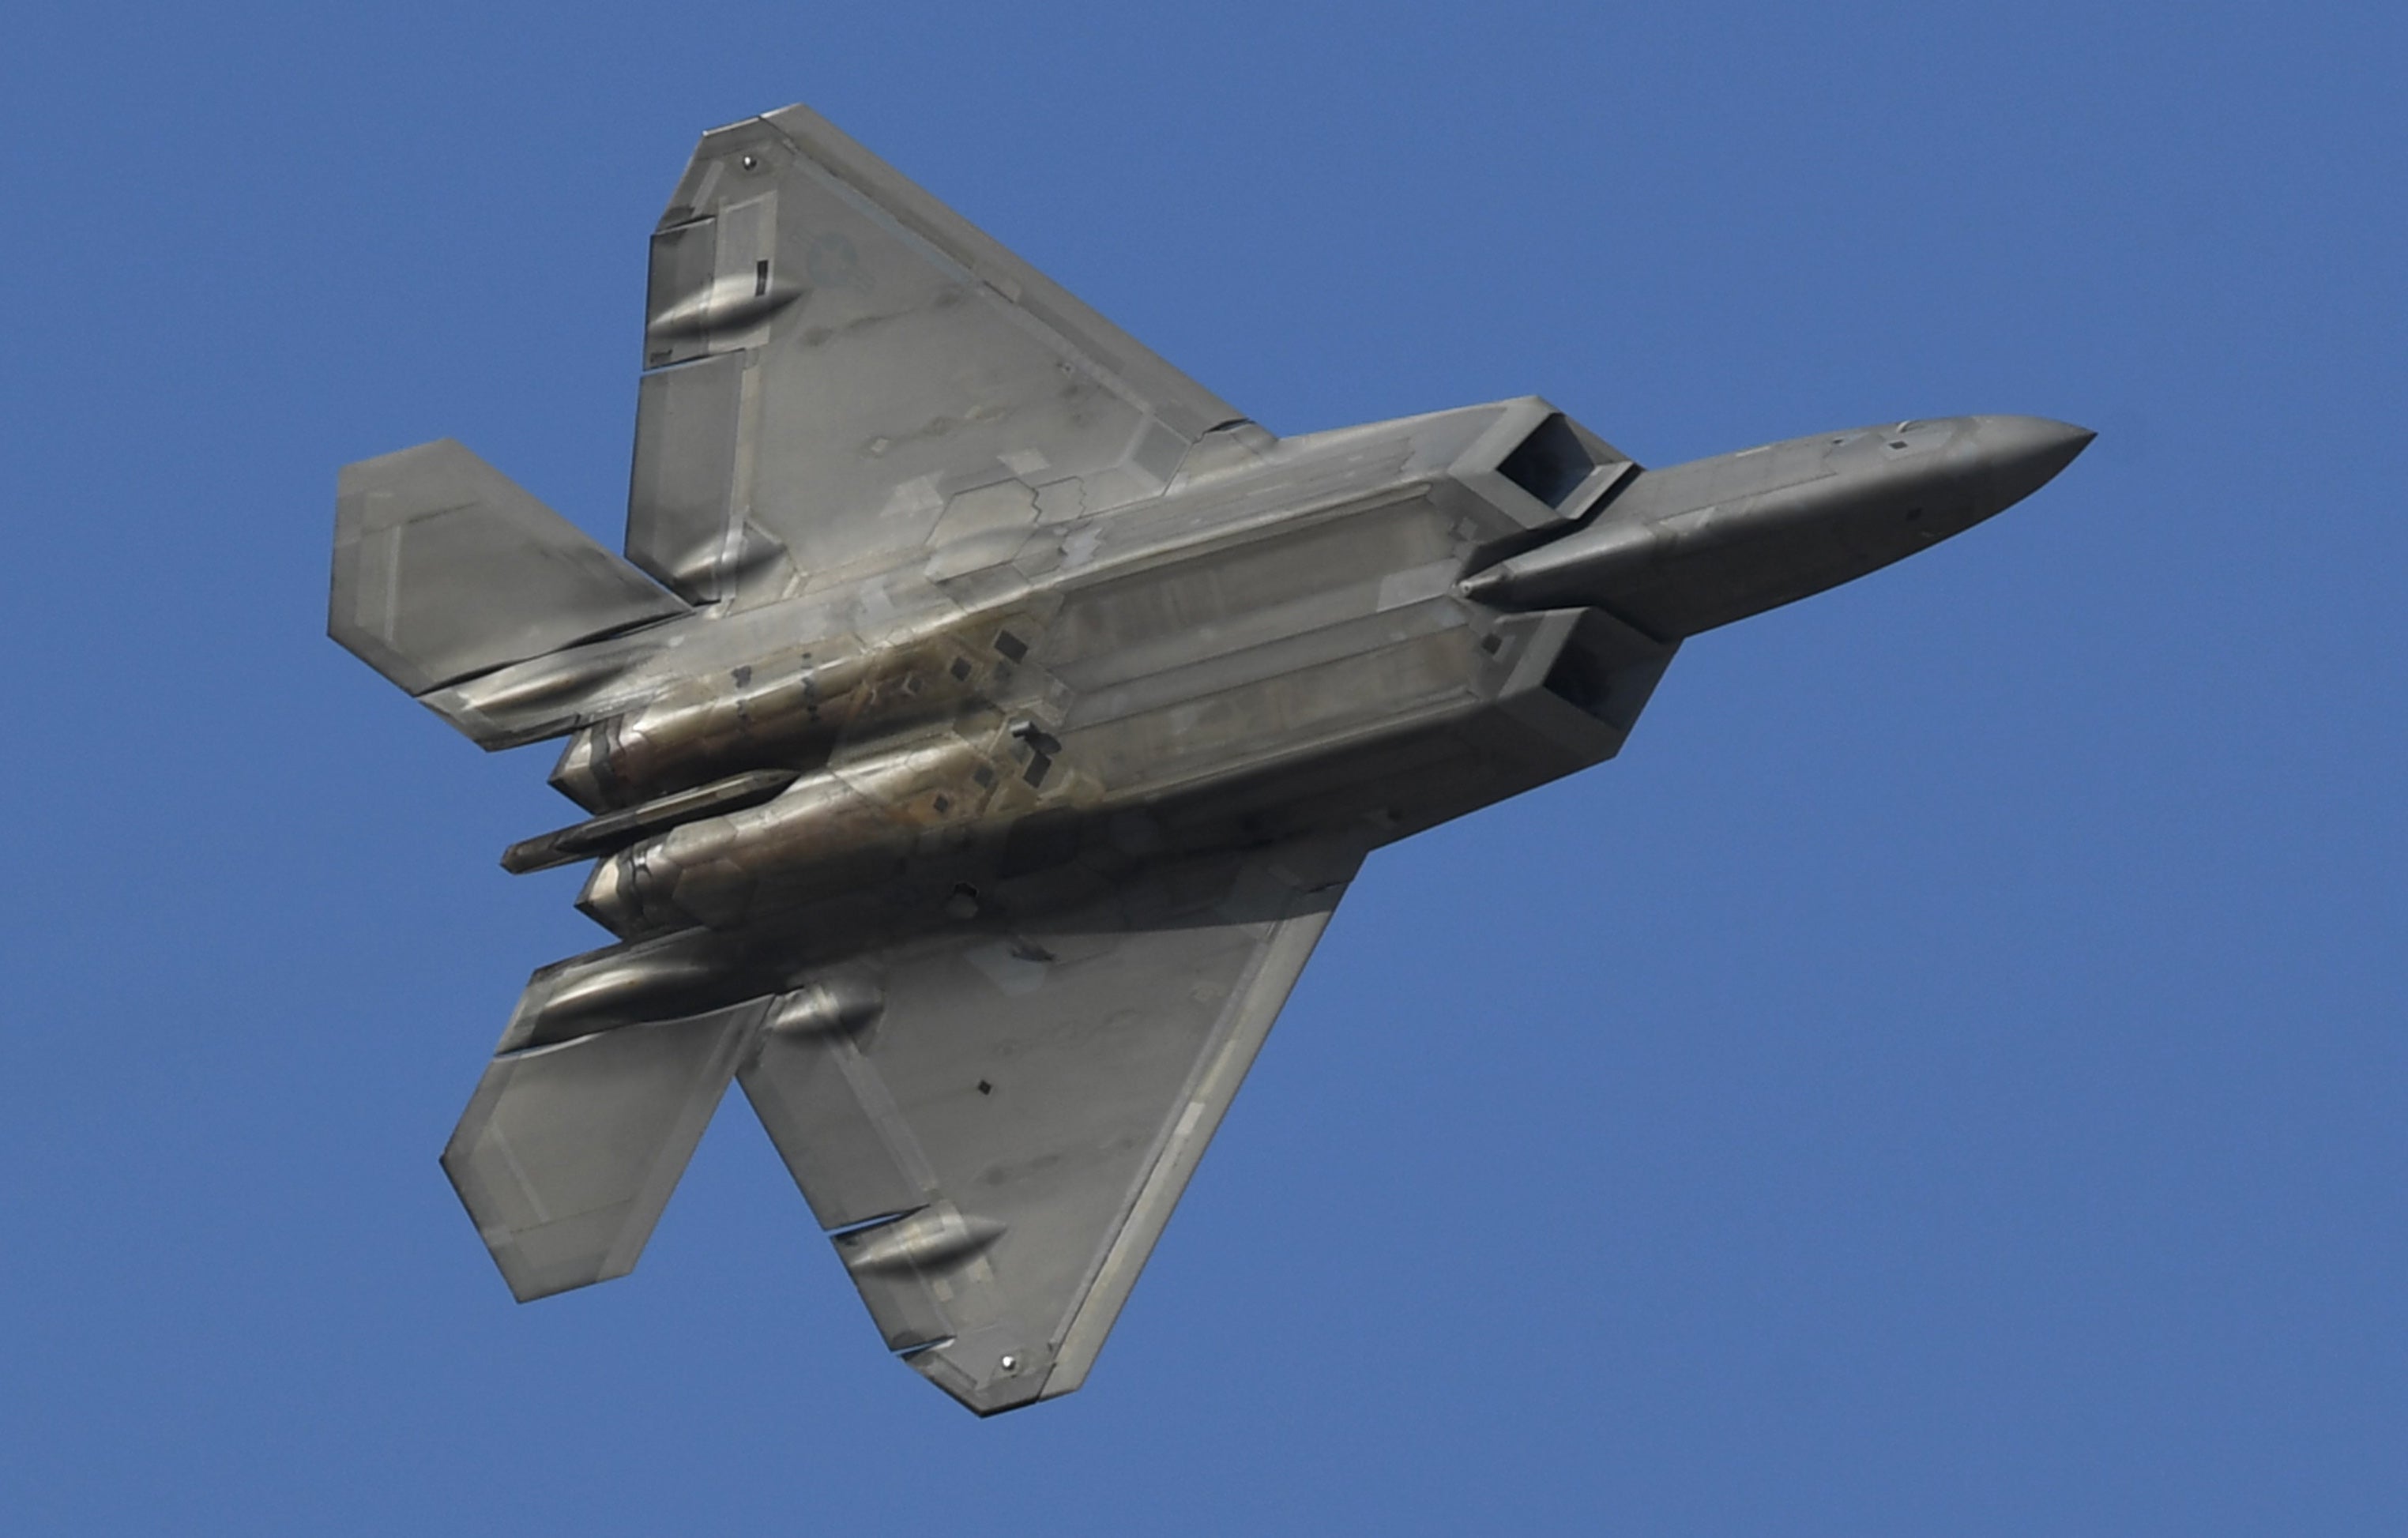 A US air force F-22 fighter jet is seen at an event during the Dubai airshow in the United Arab Emirates on November 17, 2019.